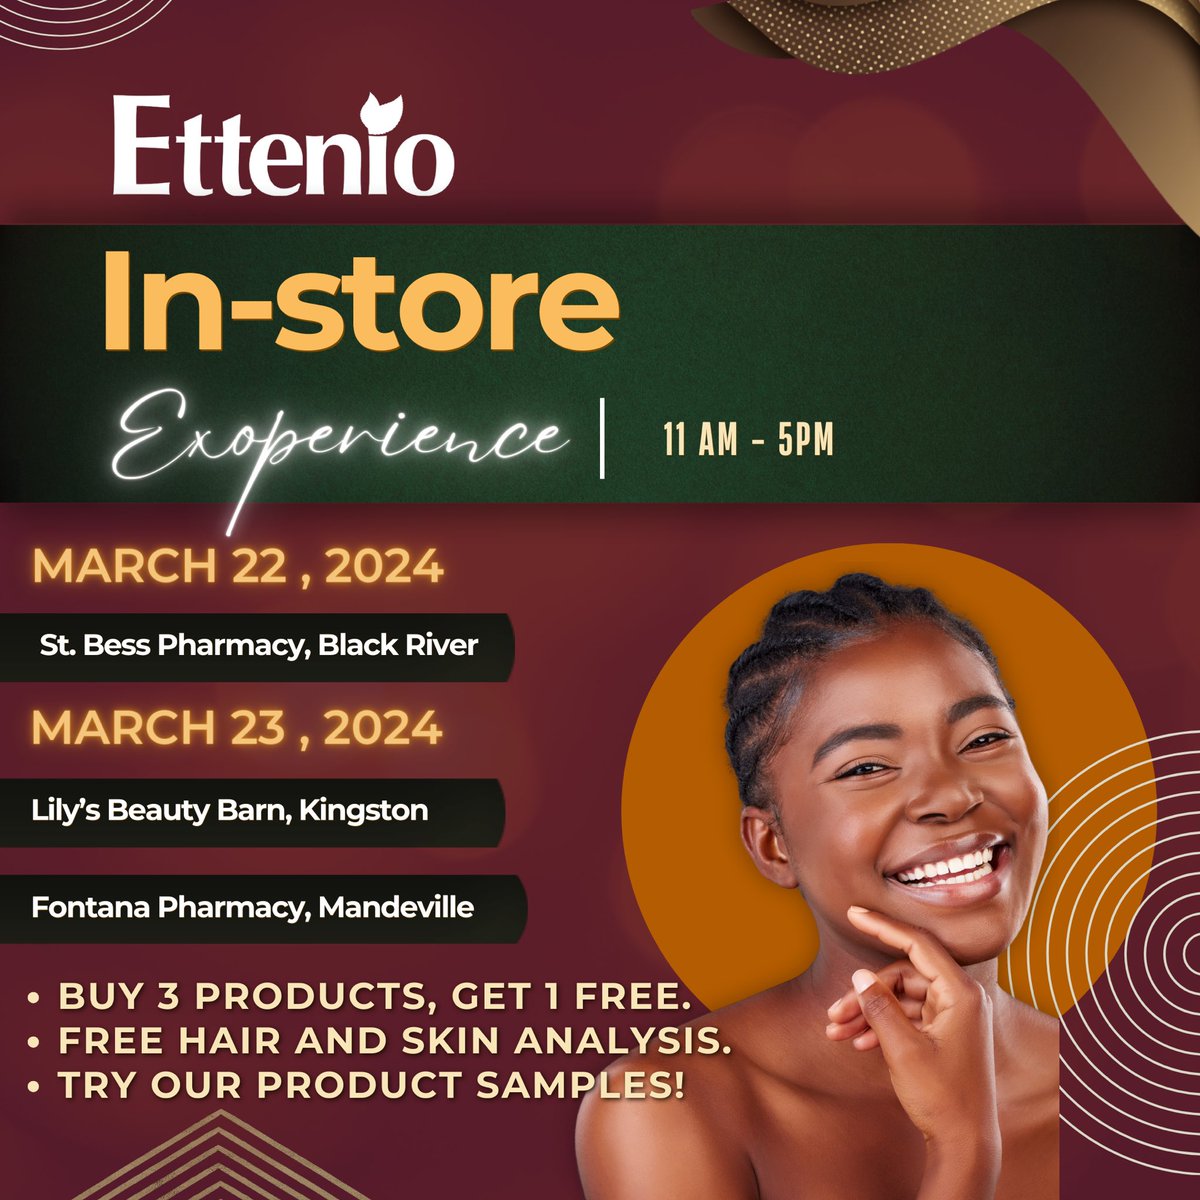 Black River, Kingston, and Mandeville will be feeling the Ettenio love this weekend. Come out and see us!⁠ ⁠ ⁠ ⁠ #jamaicanskincare #jamaicanmade #natural #greenbeauty #cleanbeauty #healthylifestyle #greenskincare #skincare #naturalhair #teamnatural  #naturalhaircommunity